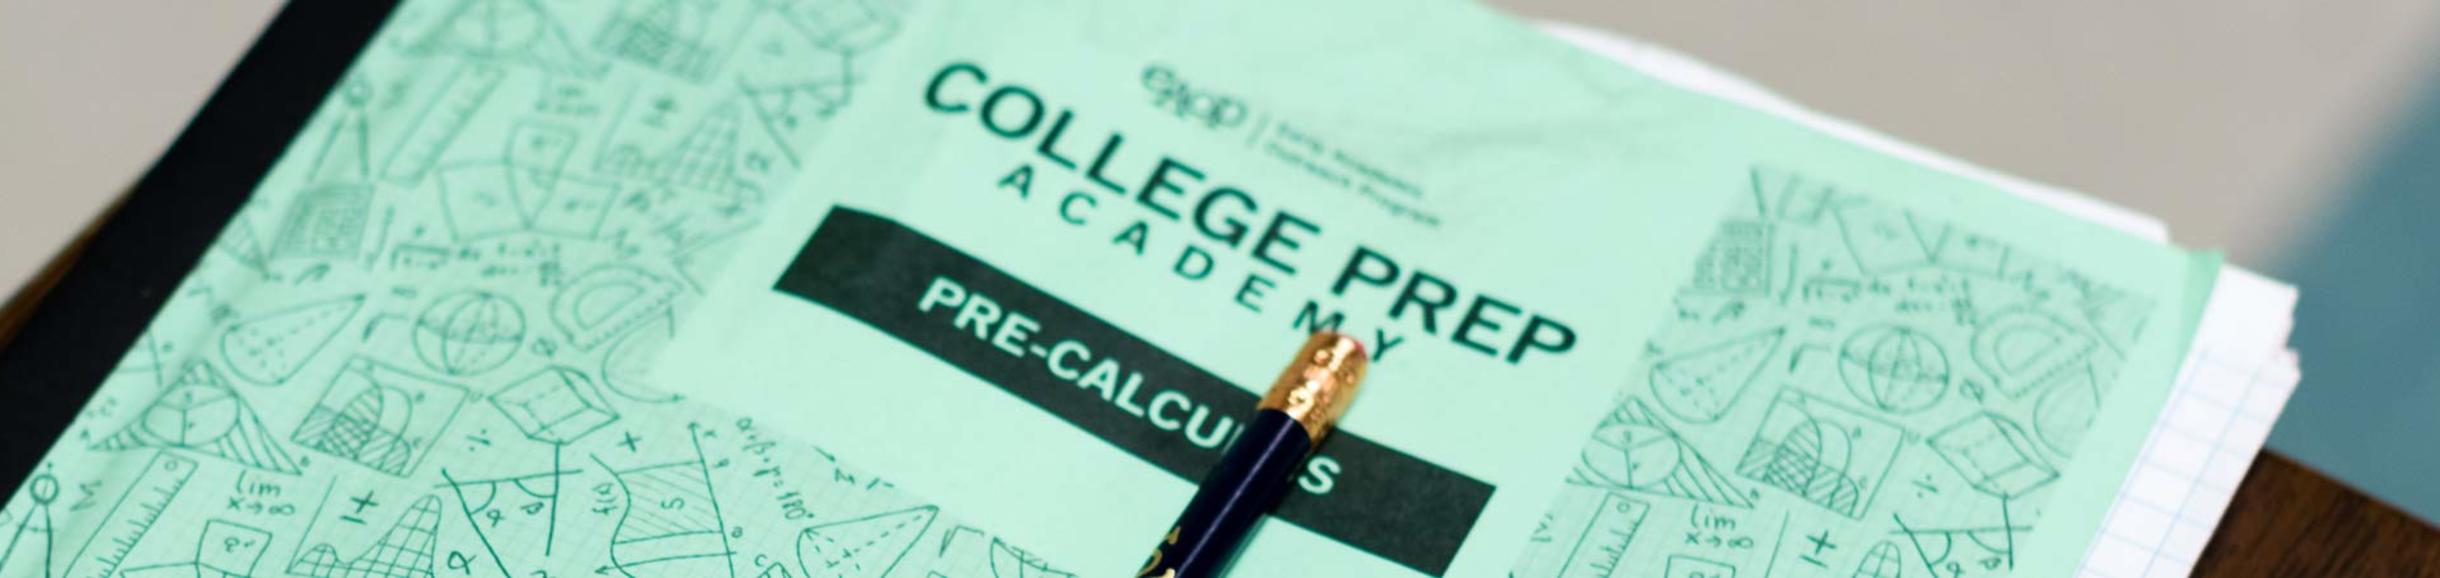 This pre-calculus workbook is one of the resources EAOP at UC Riverside provides high school students through its College Prep Academy.